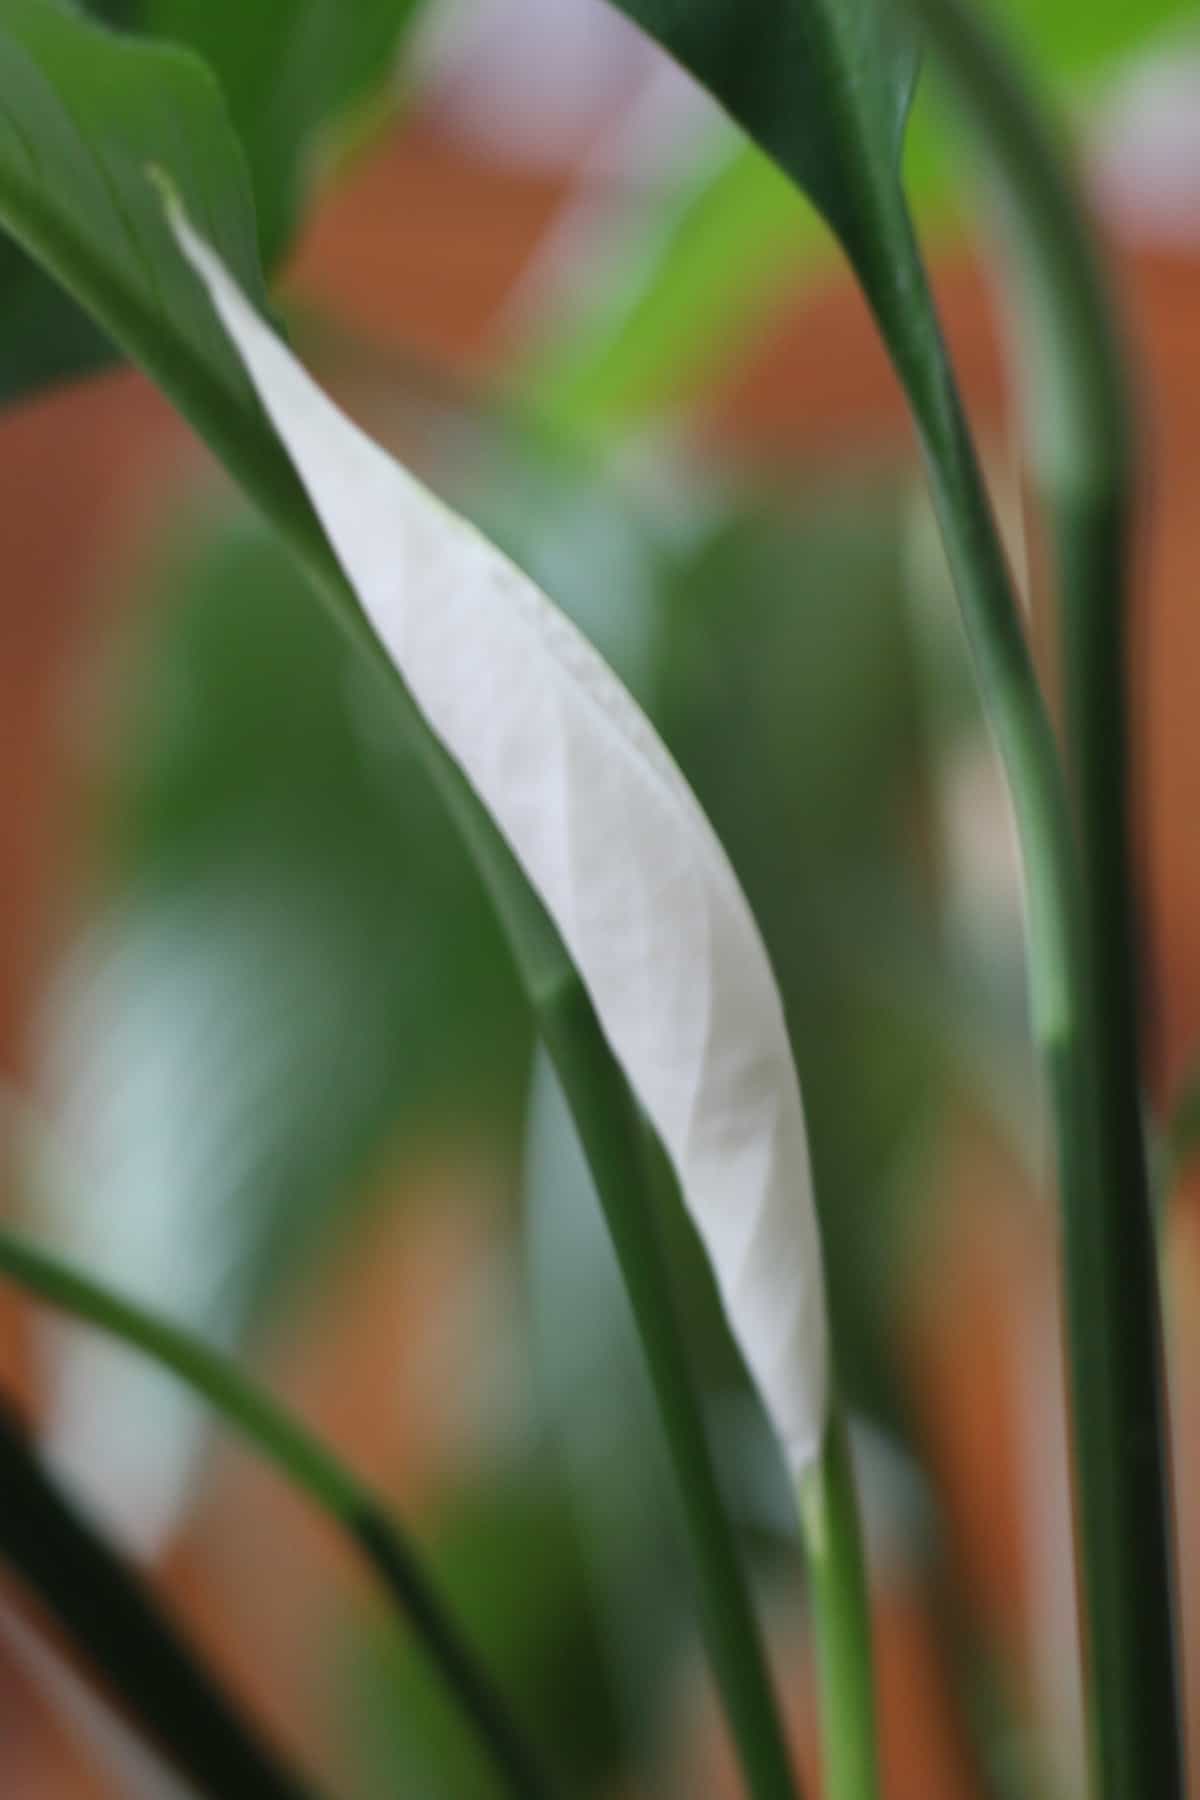 White peace lily flower - side profile